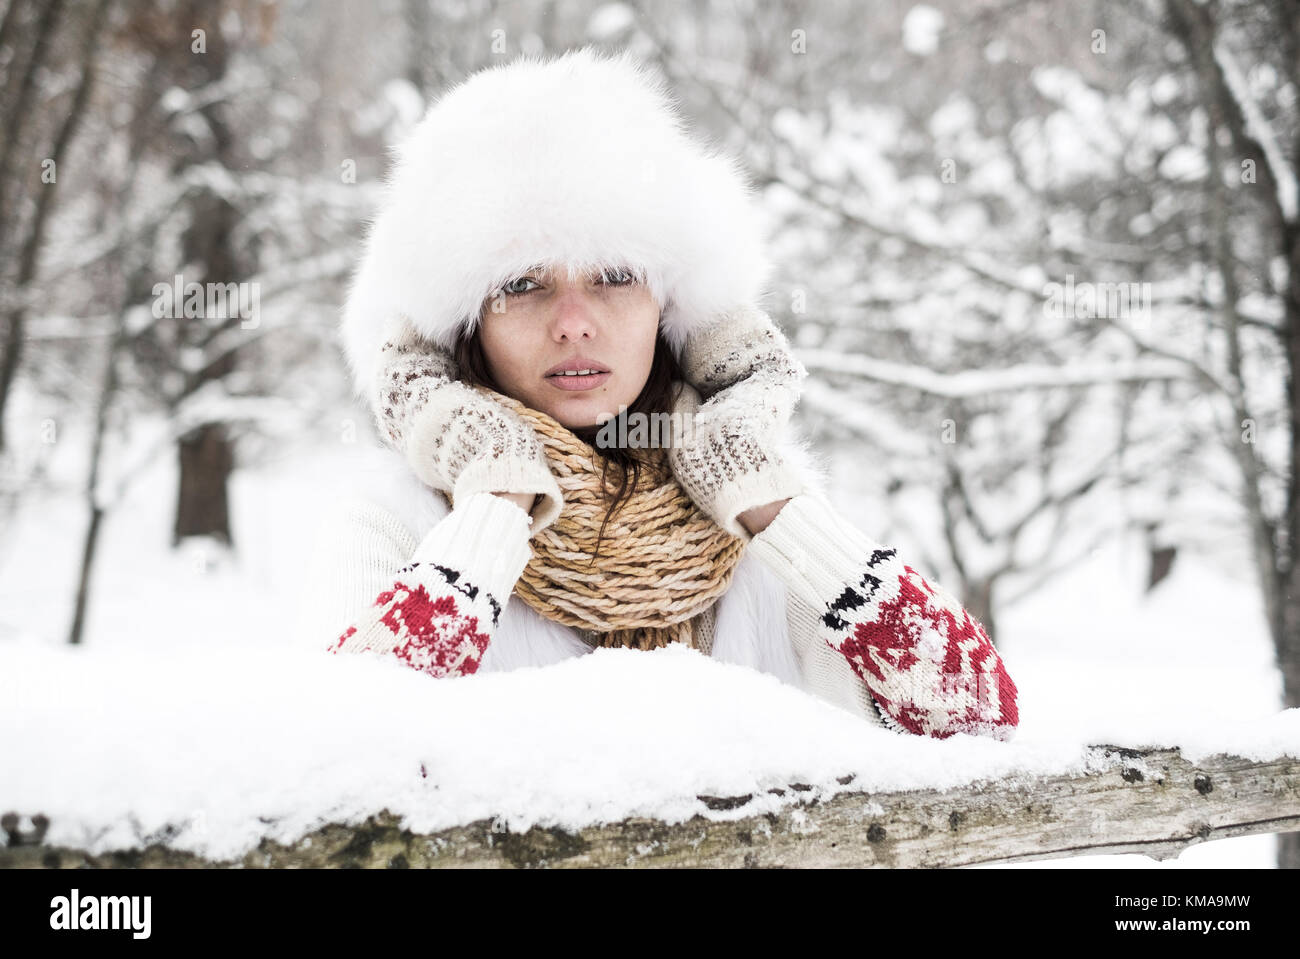 Young woman freezing in the snow forest. With winter coat, knit scarf and hat Stock Photo